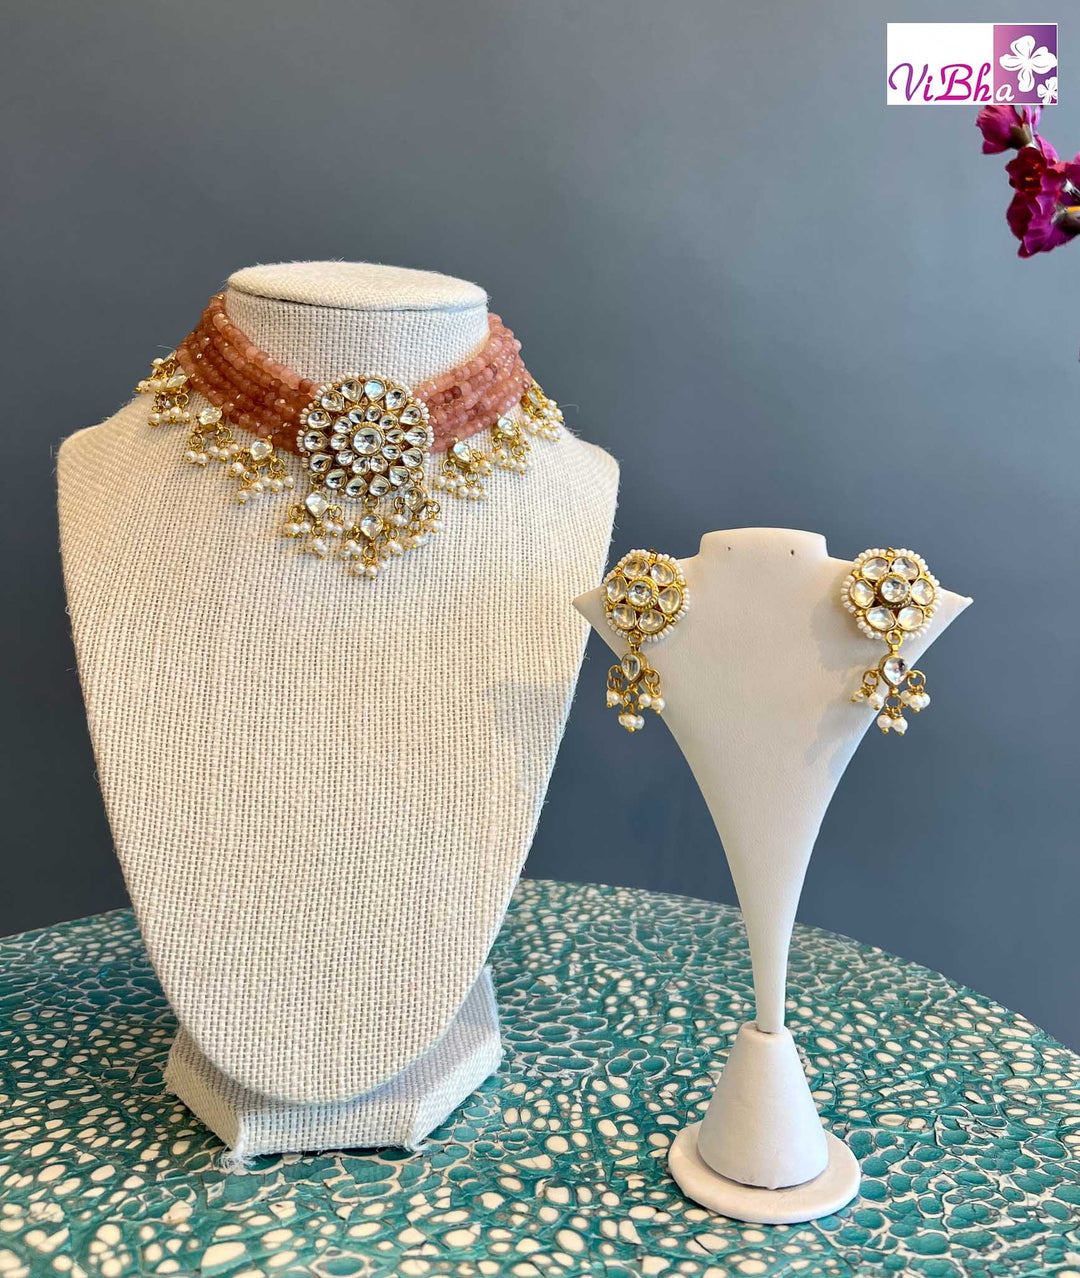 Accessories & Jewelry - Rose Pink Beads And Pearls Set